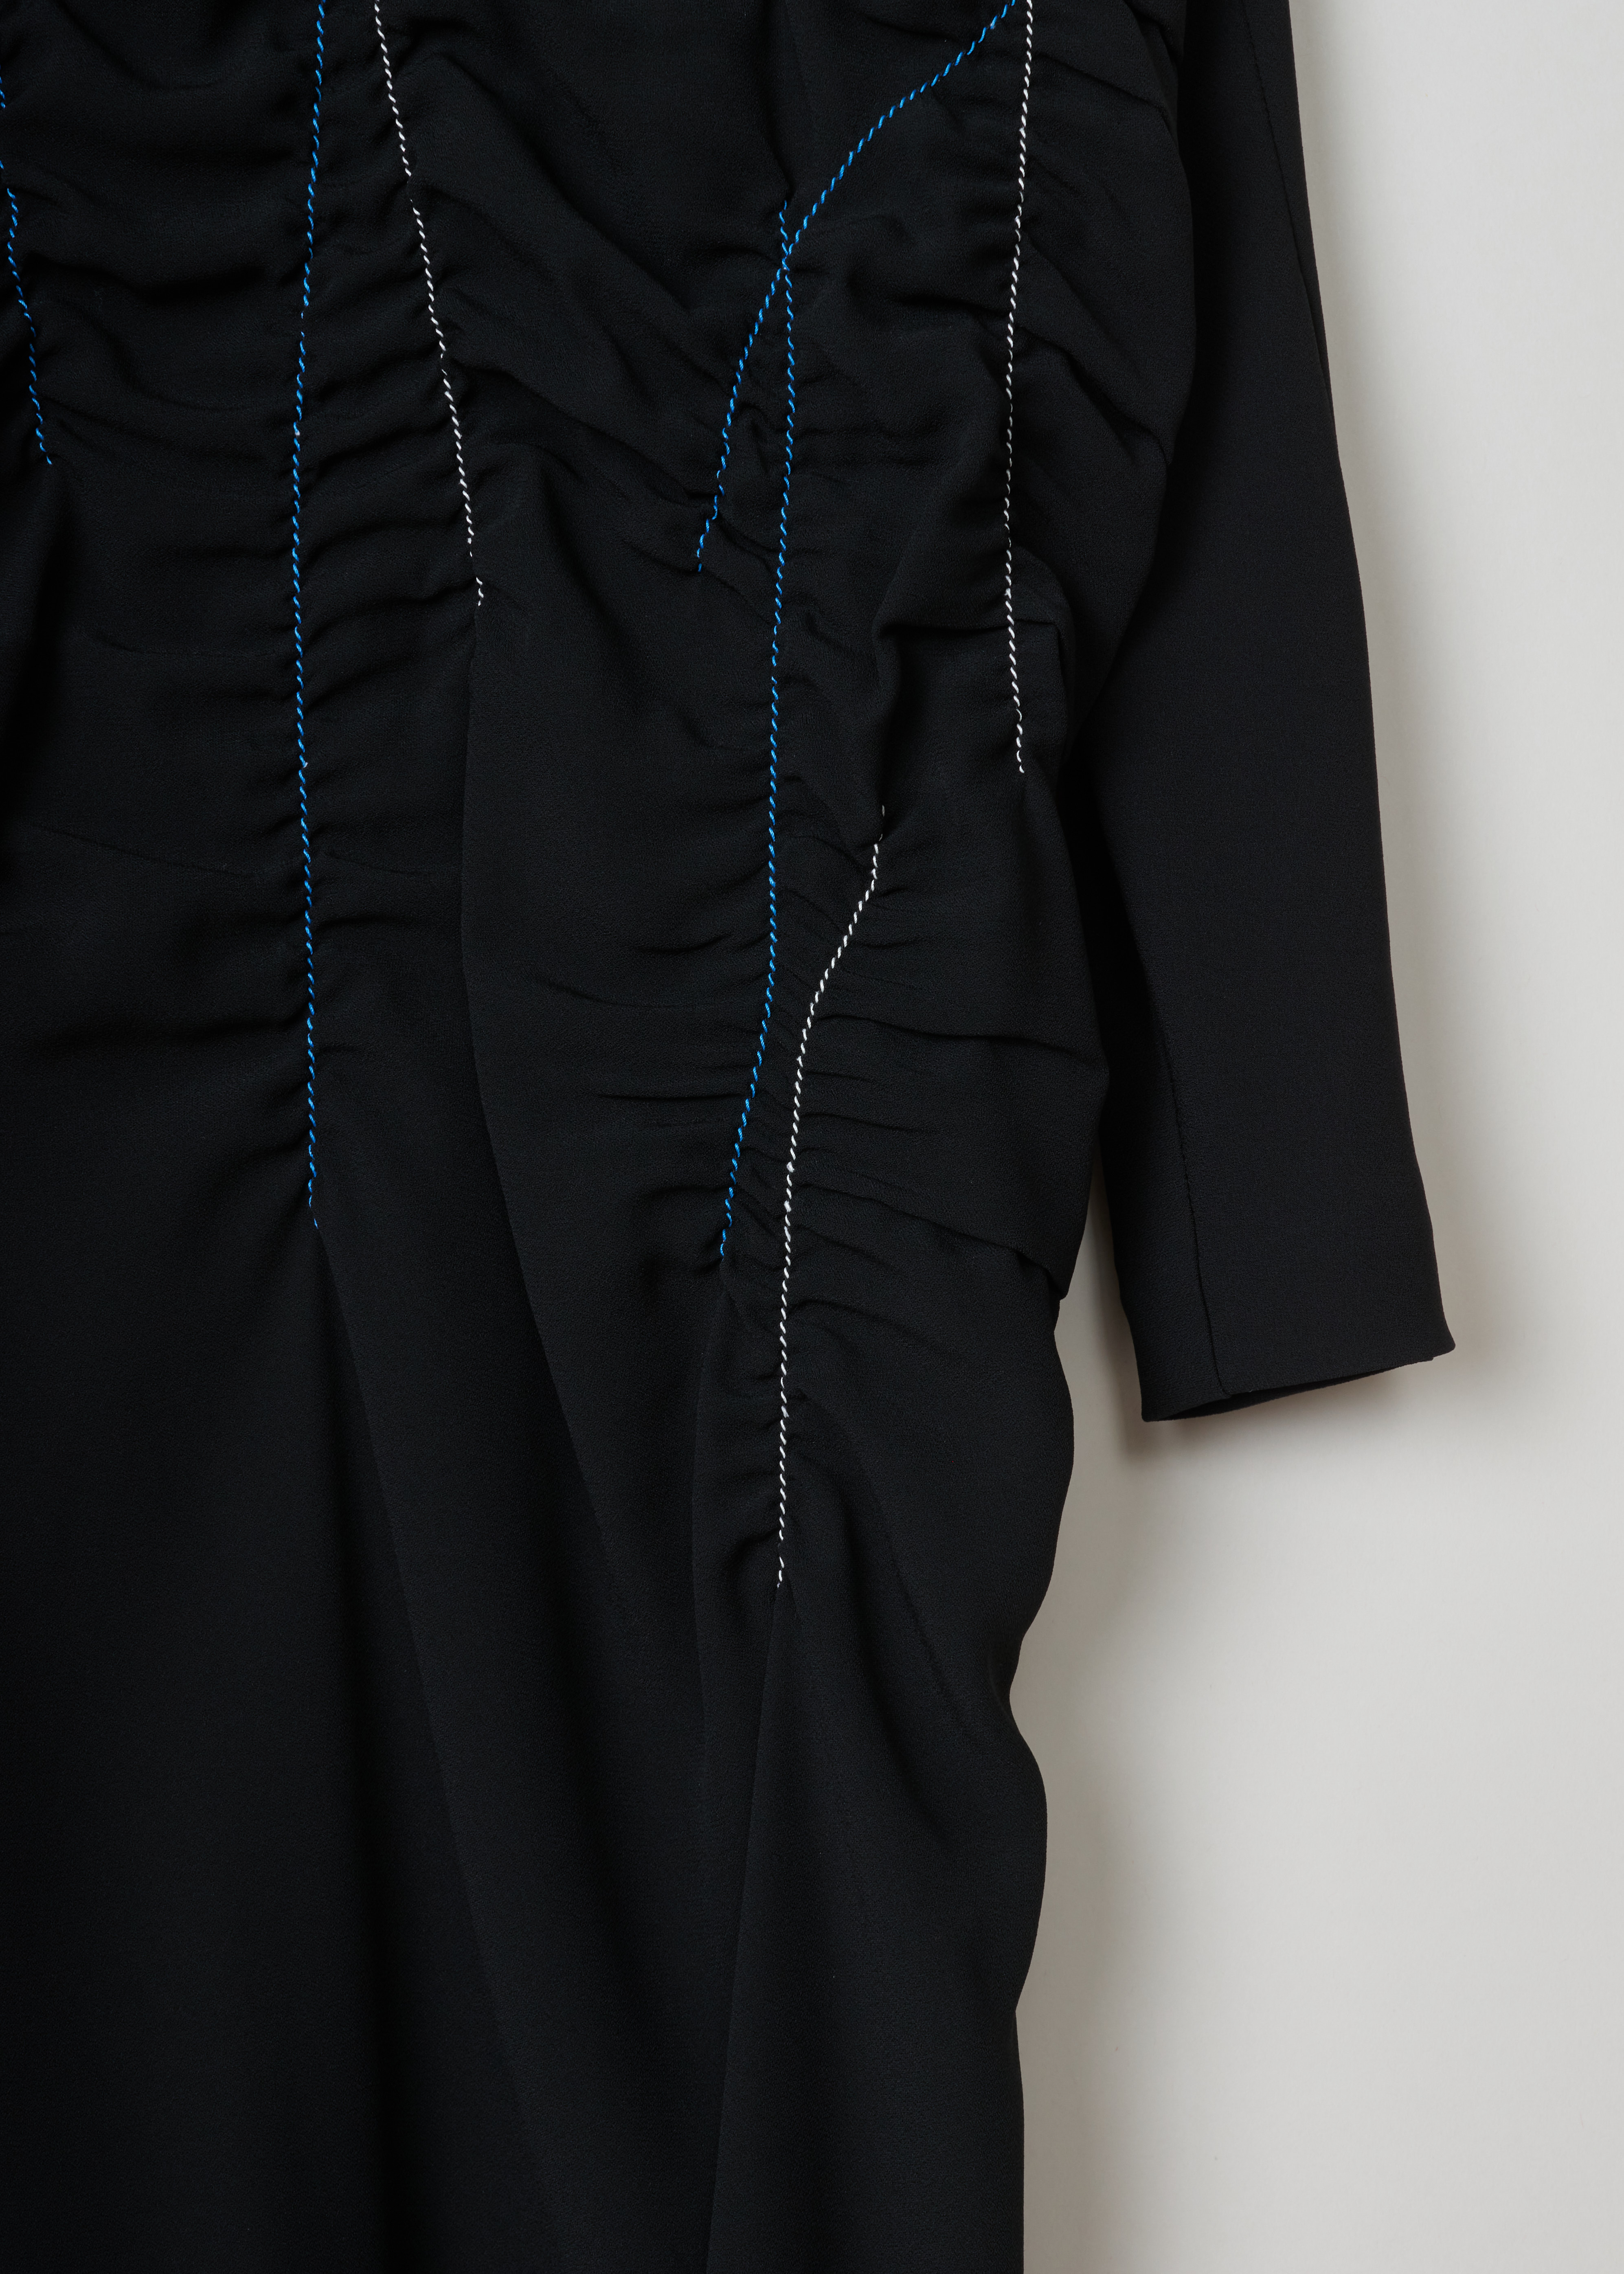 Marni Elasticated black dress ABMAZ51M00_TV285_00N99 black detail. Long sleeves black dress with contrasting blue and white elastic stitching to create gathers in the mid-section of the dress.